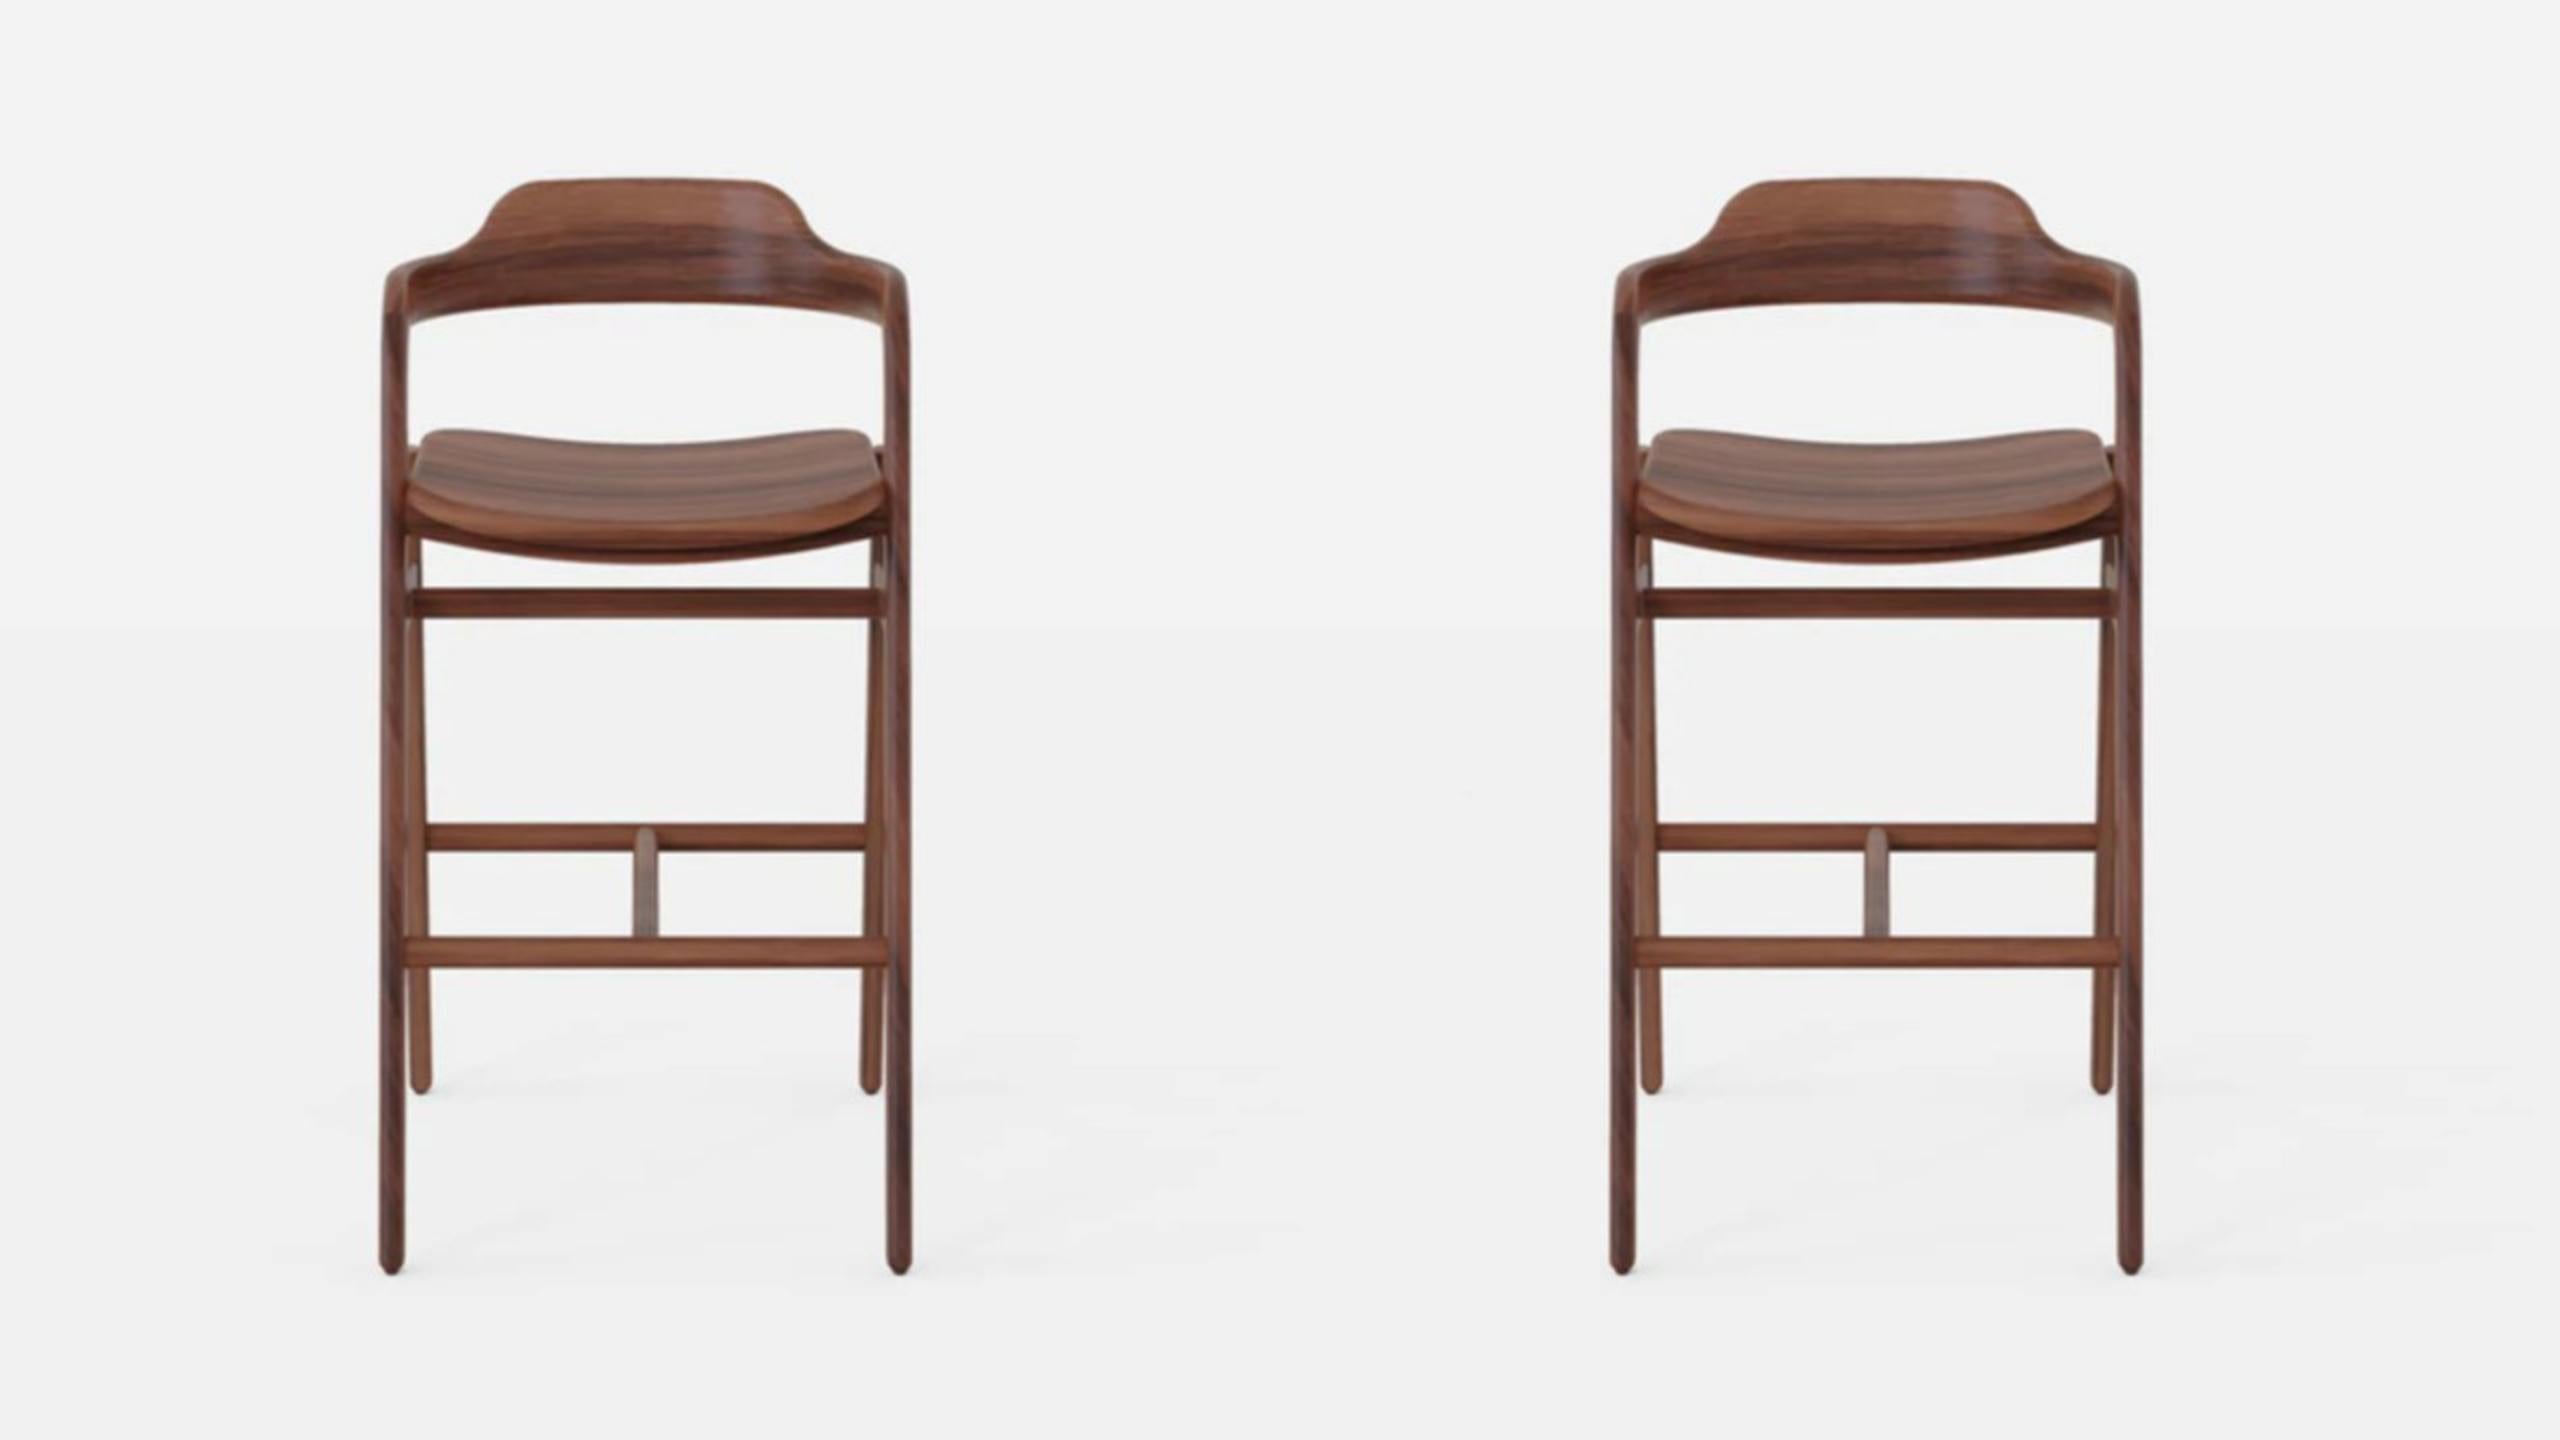 Set of 2 balance high chair by Sebastián Angeles
Material: Walnut
Dimensions: W 45 x D 40 x 100 cm
Also available: Other colors available

The love of processes, the properties of materials, details and concepts make Dorica Taller a study not